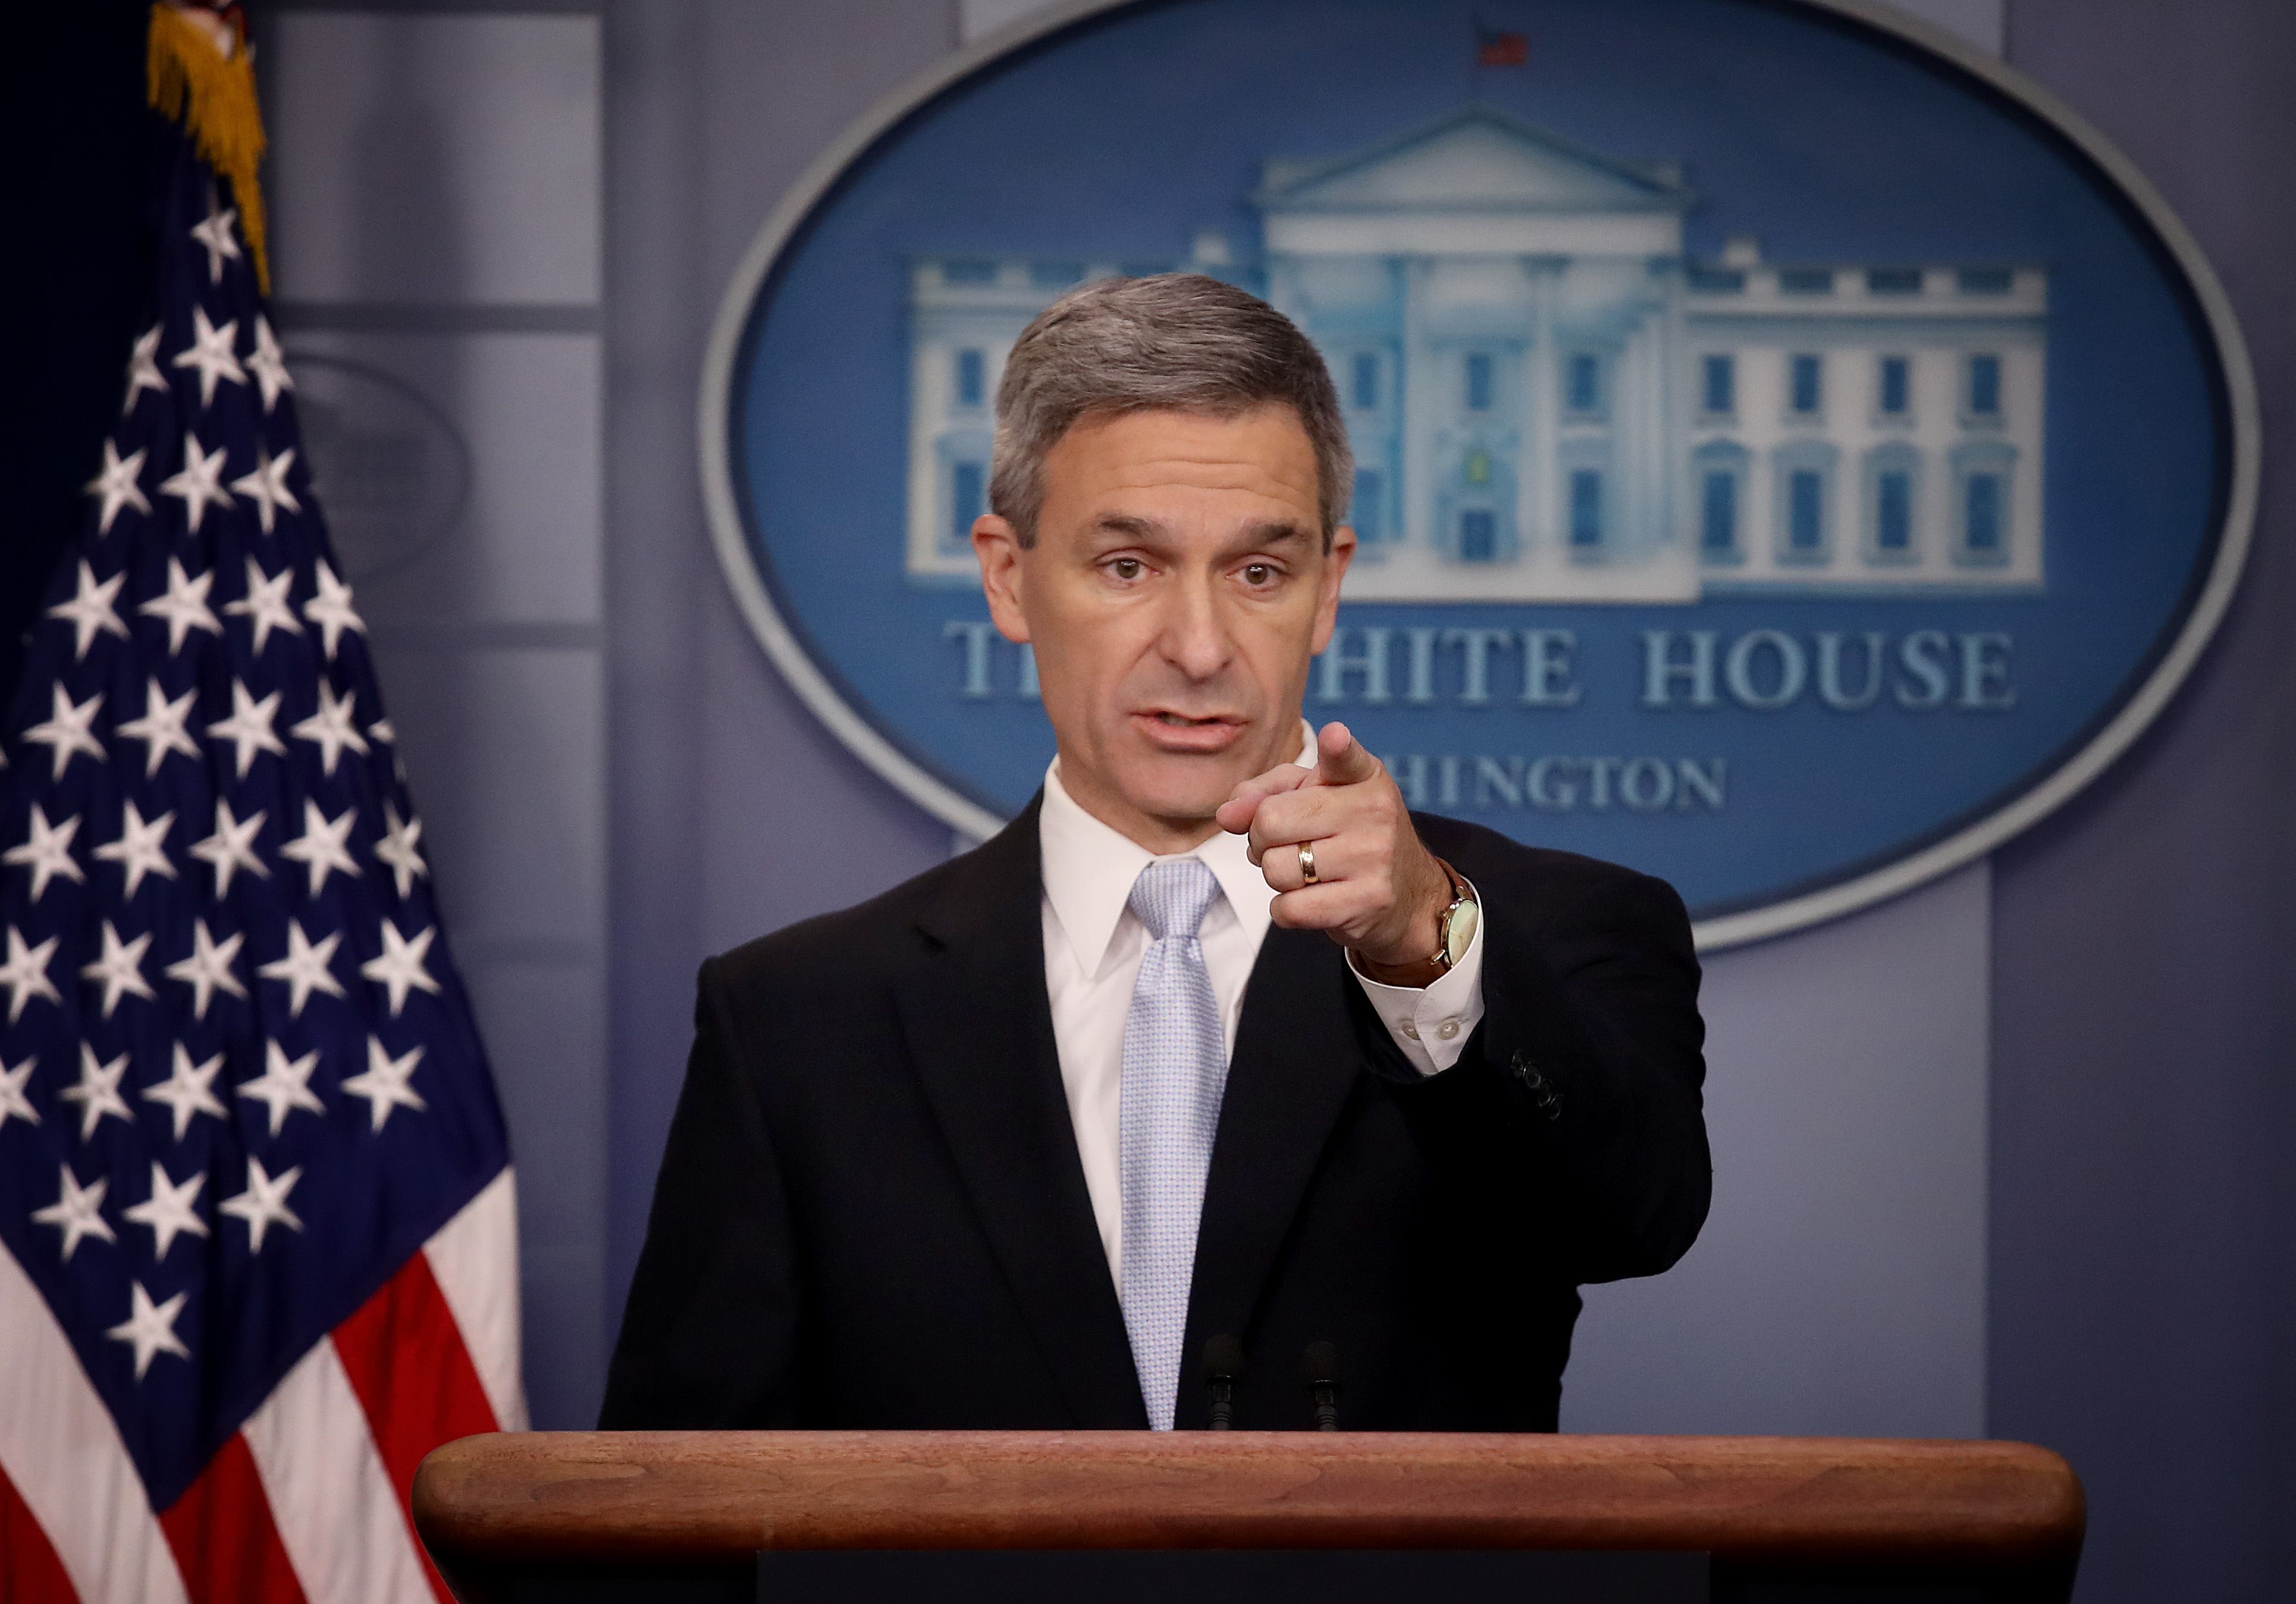 WASHINGTON, DC - AUGUST 12: Acting Director of U.S. Citizenship and Immigration Services Ken Cuccinelli speaks about immigration policy at the White House during a briefing August 12, 2019 in Washington, DC. During the briefing, Cuccinelli said that immigrants legally in the U.S. would no longer be eligible for green cards if they utilize any social programs available in the nation. (Photo by Win McNamee/Getty Images)